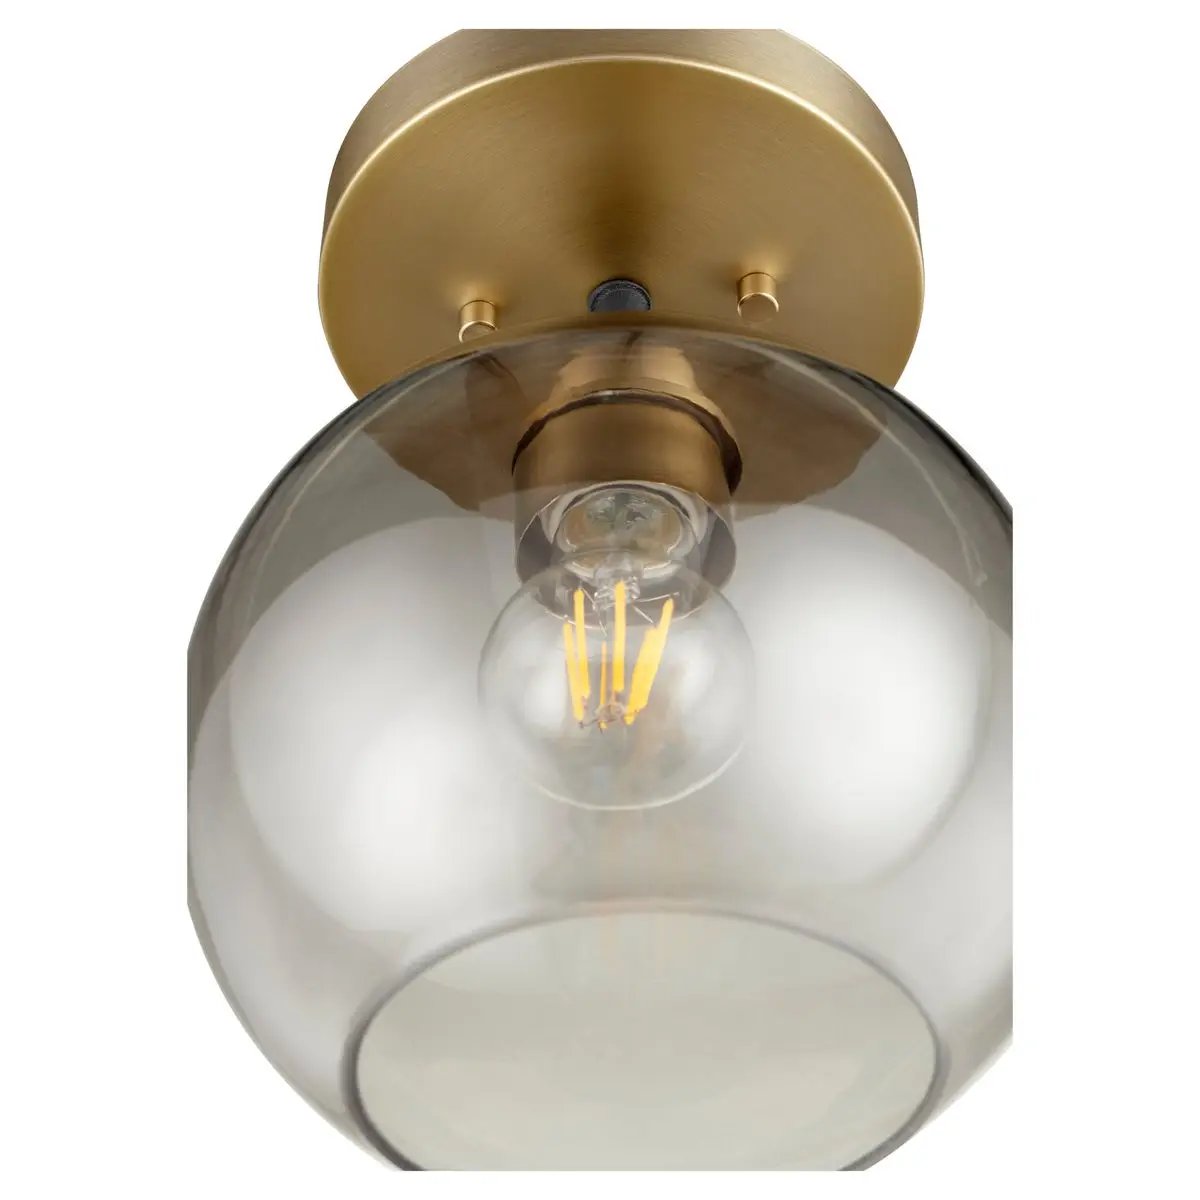 Transitional flush mount lighting with clear glass shade and elegant finishes. Soft diffusion of light for a glowing radiance.